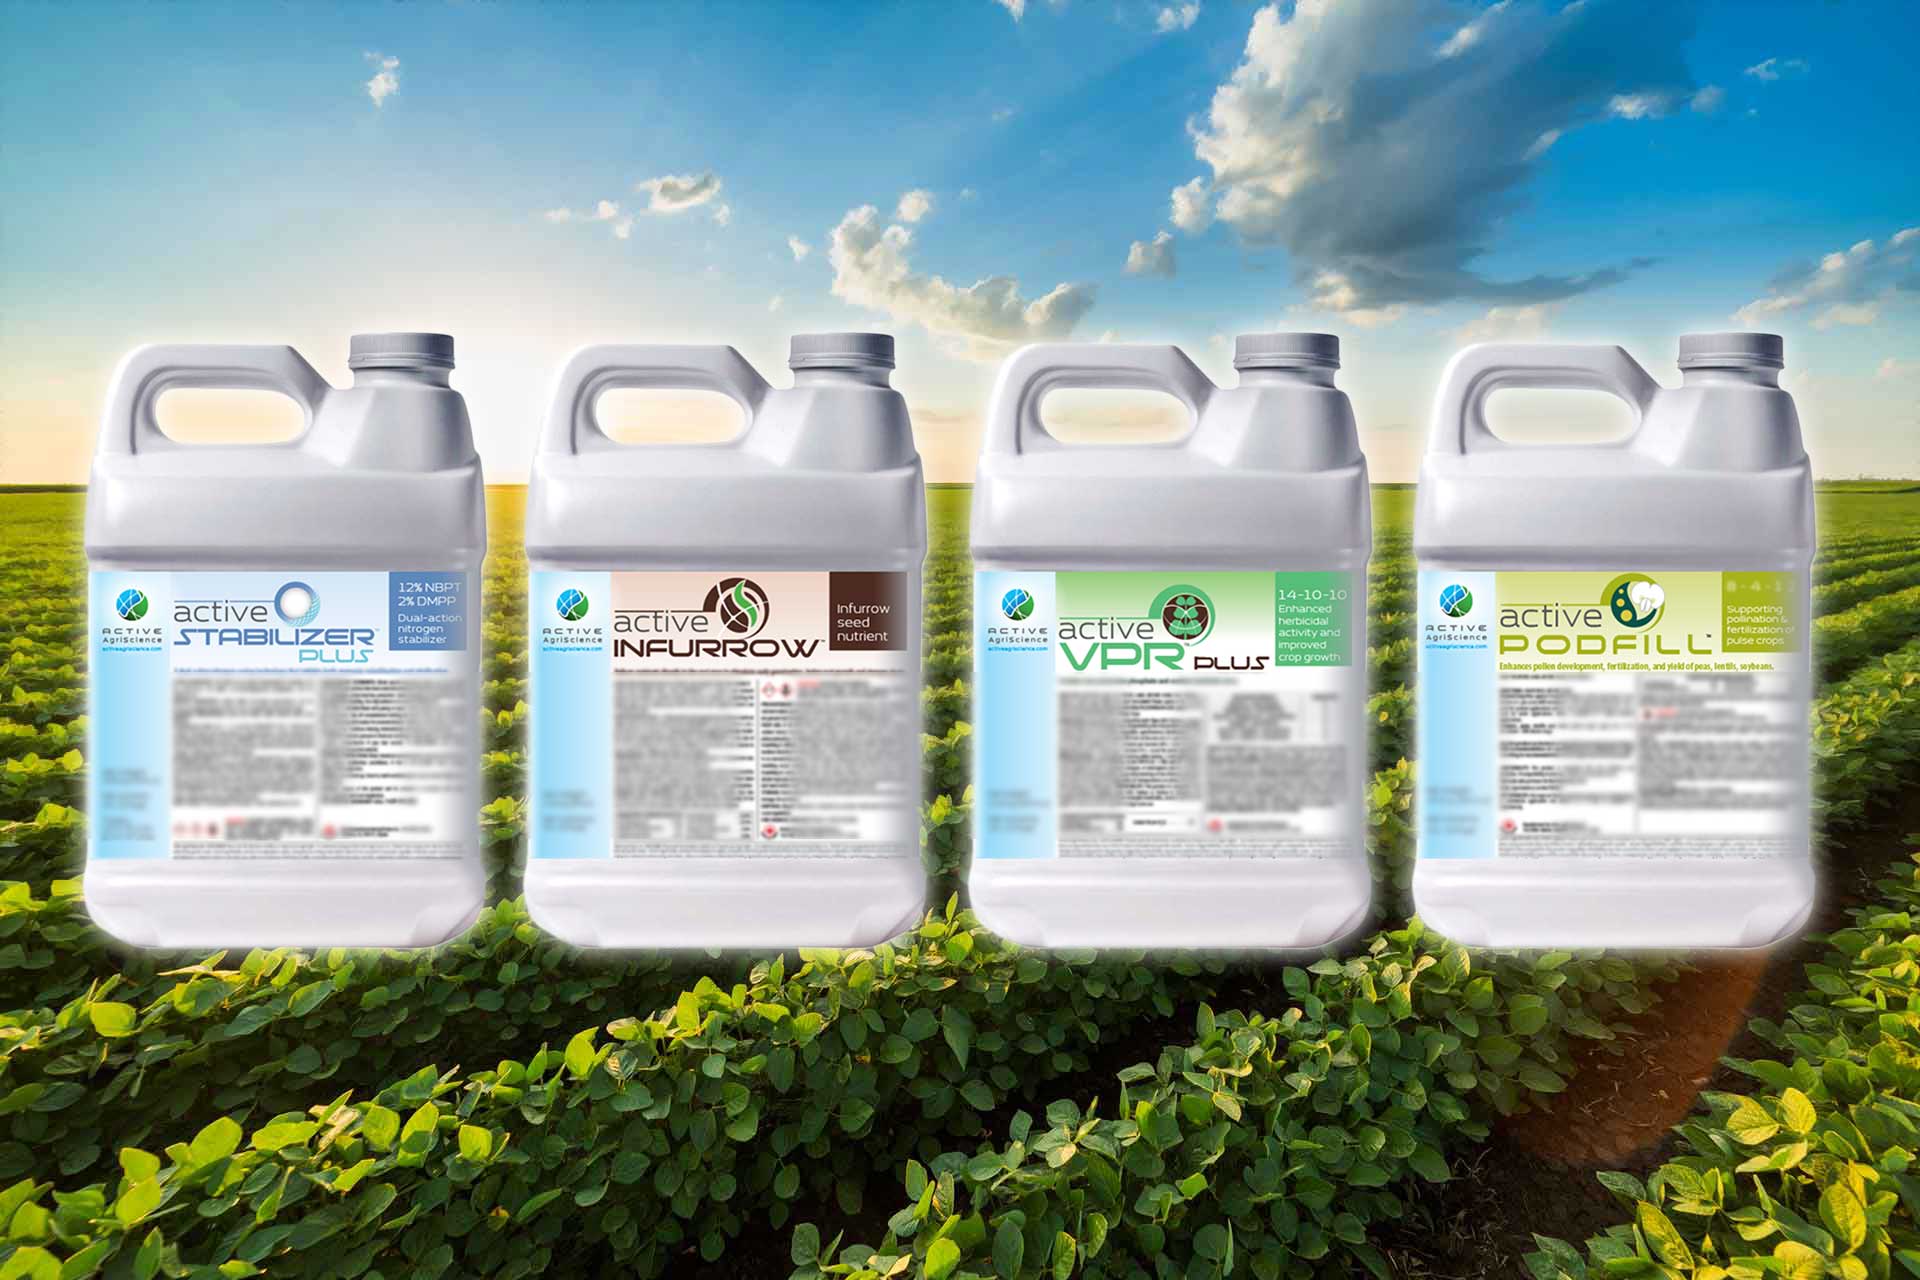 Active AgriScience products: Active STABILIZER PLUS, Active INFURROW, Active VPR PLUS, Active PodFILL.